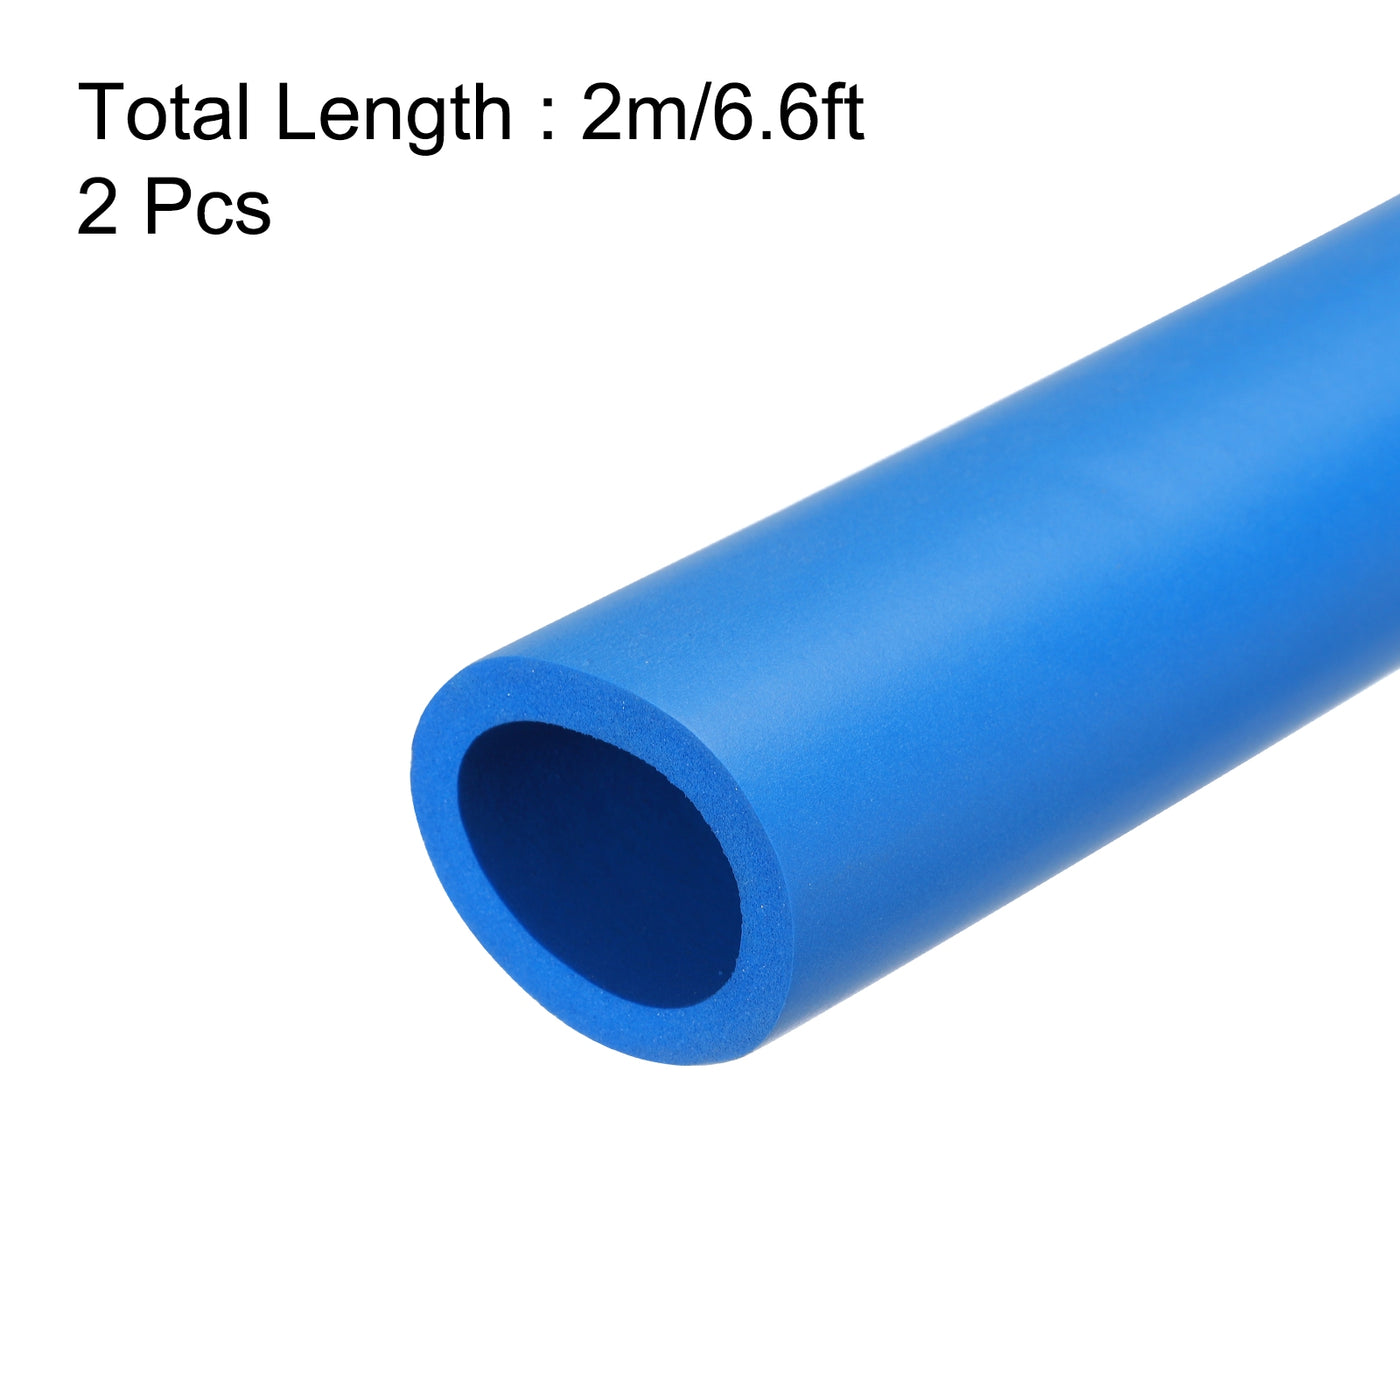 uxcell Uxcell 2pcs 3.3ft Pipe Insulation Tube 1 Inch(25mm) ID 35mm OD Foam Tubing for Handle Grip Support, Blue